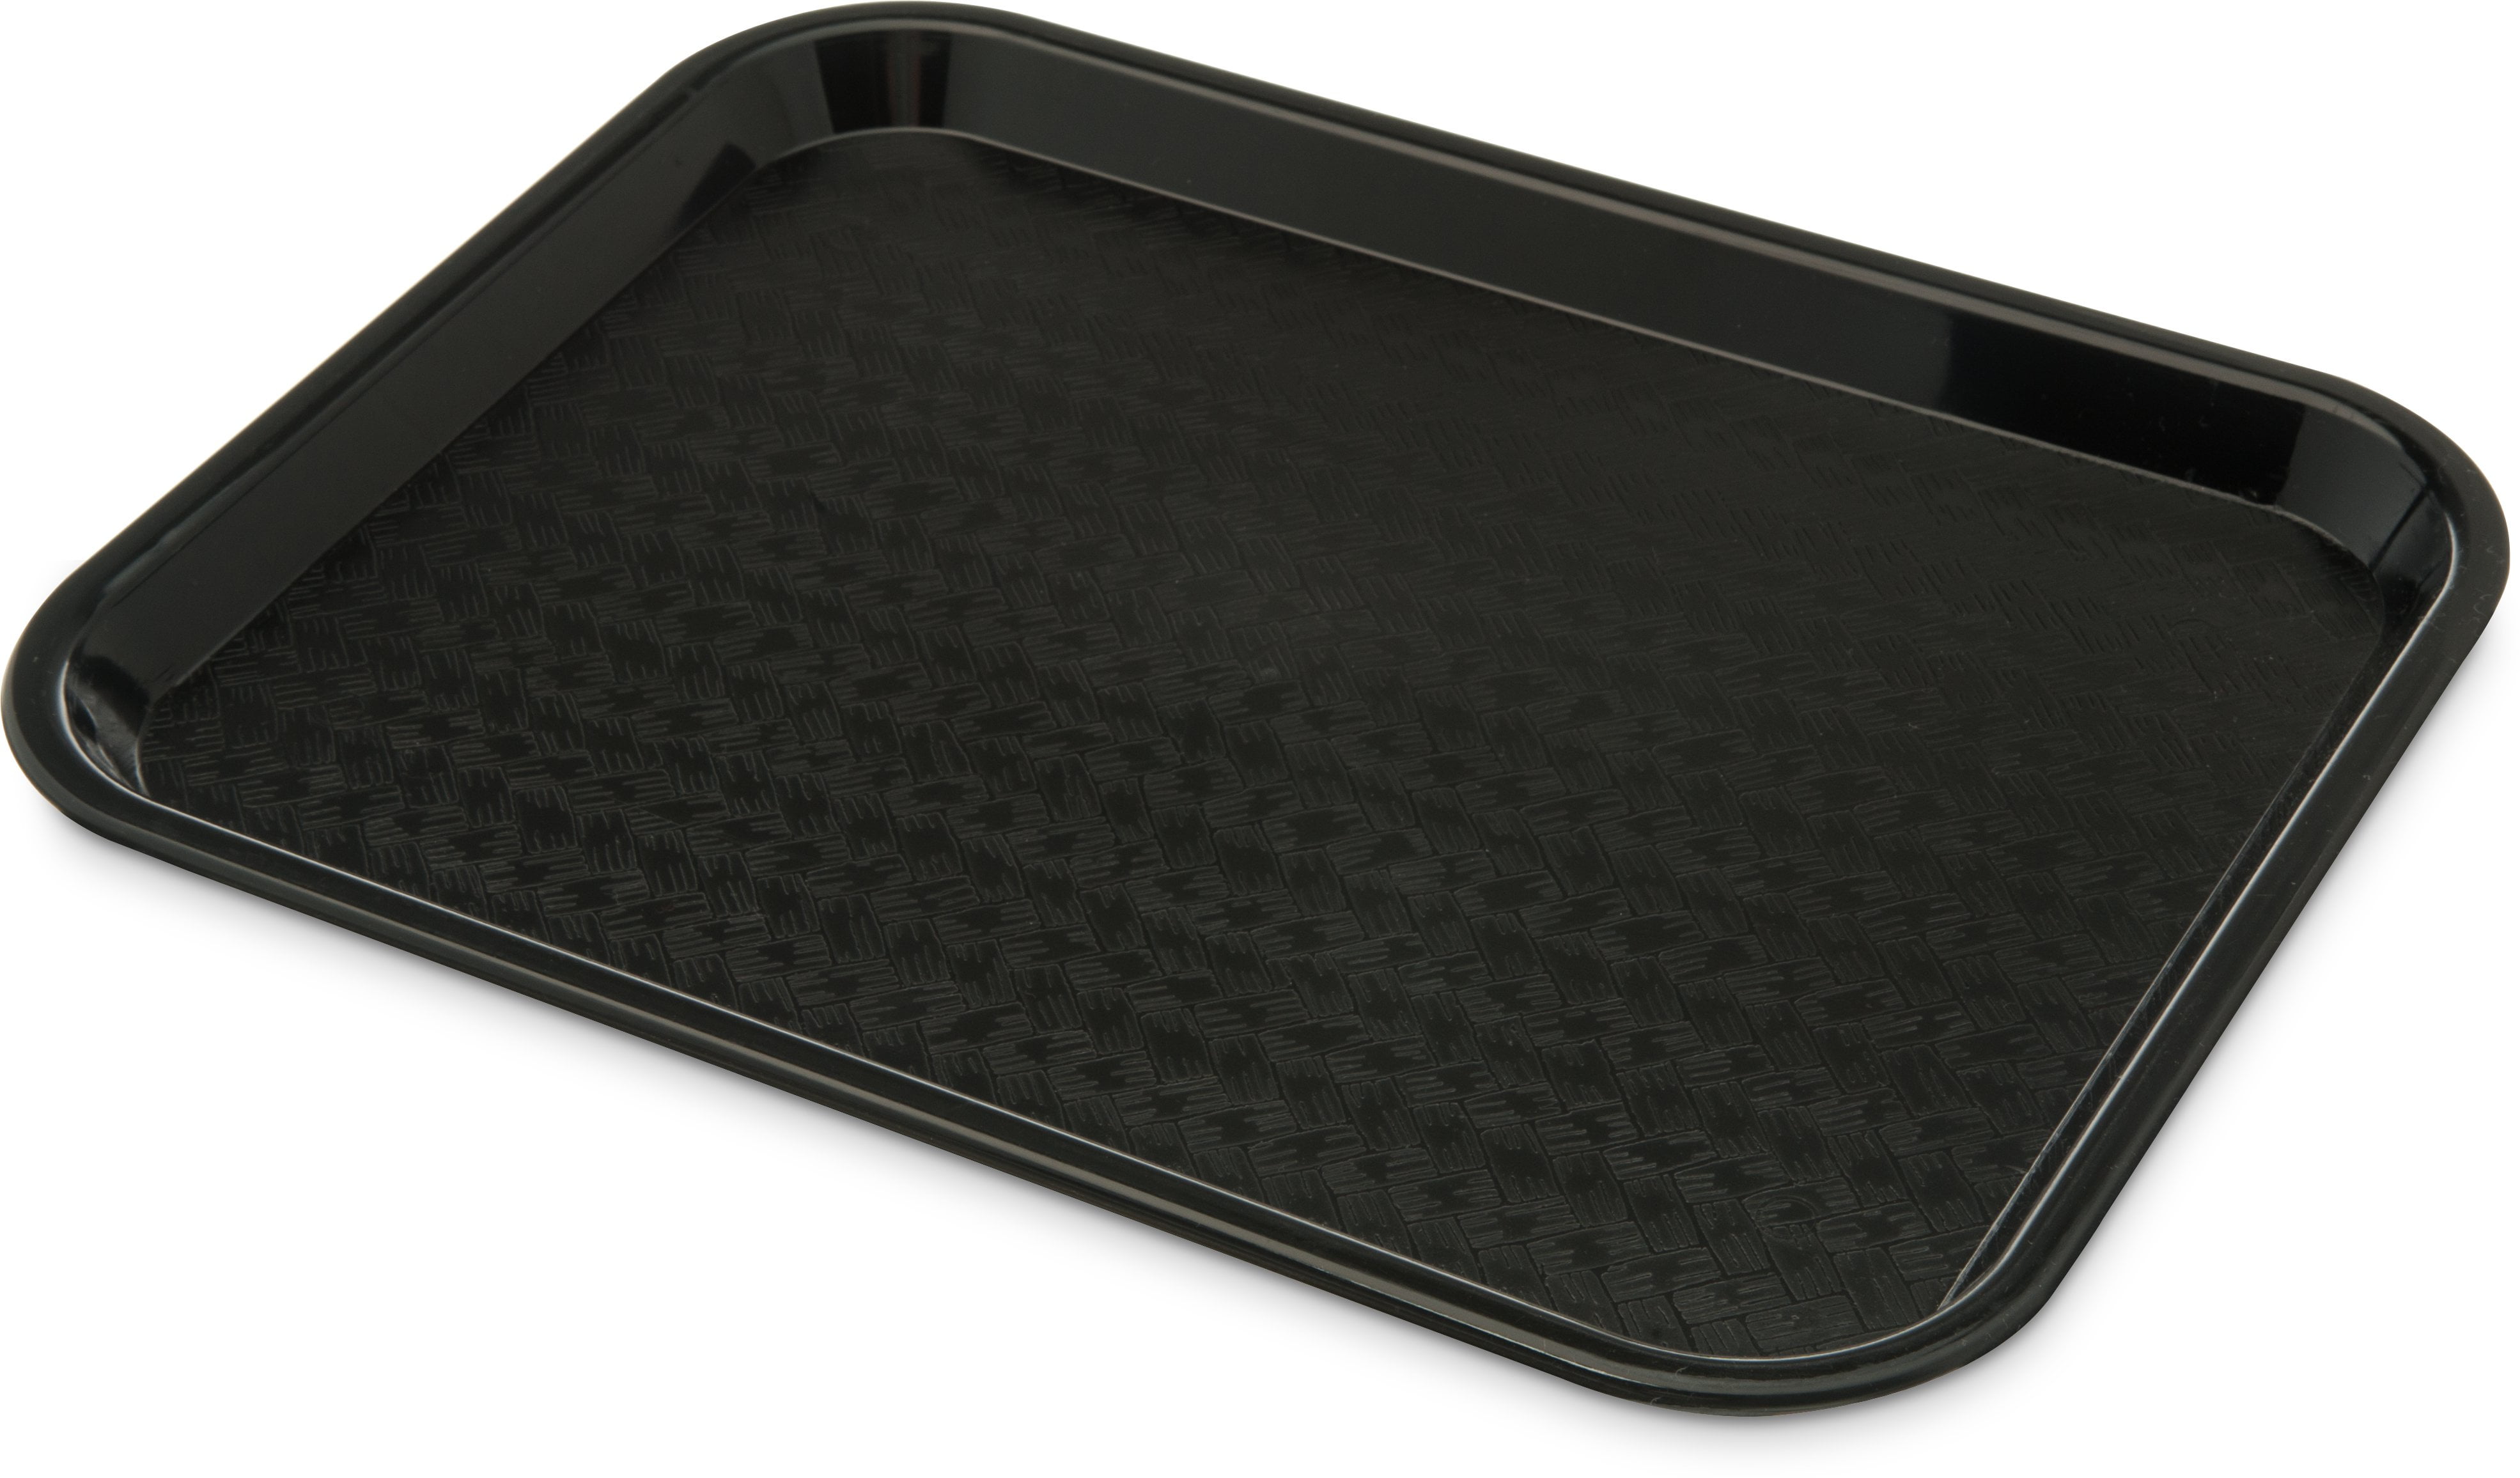 Catering Cafe Restaurant coffee shop Tray Black ShockStainHeat proof  300x410mm 